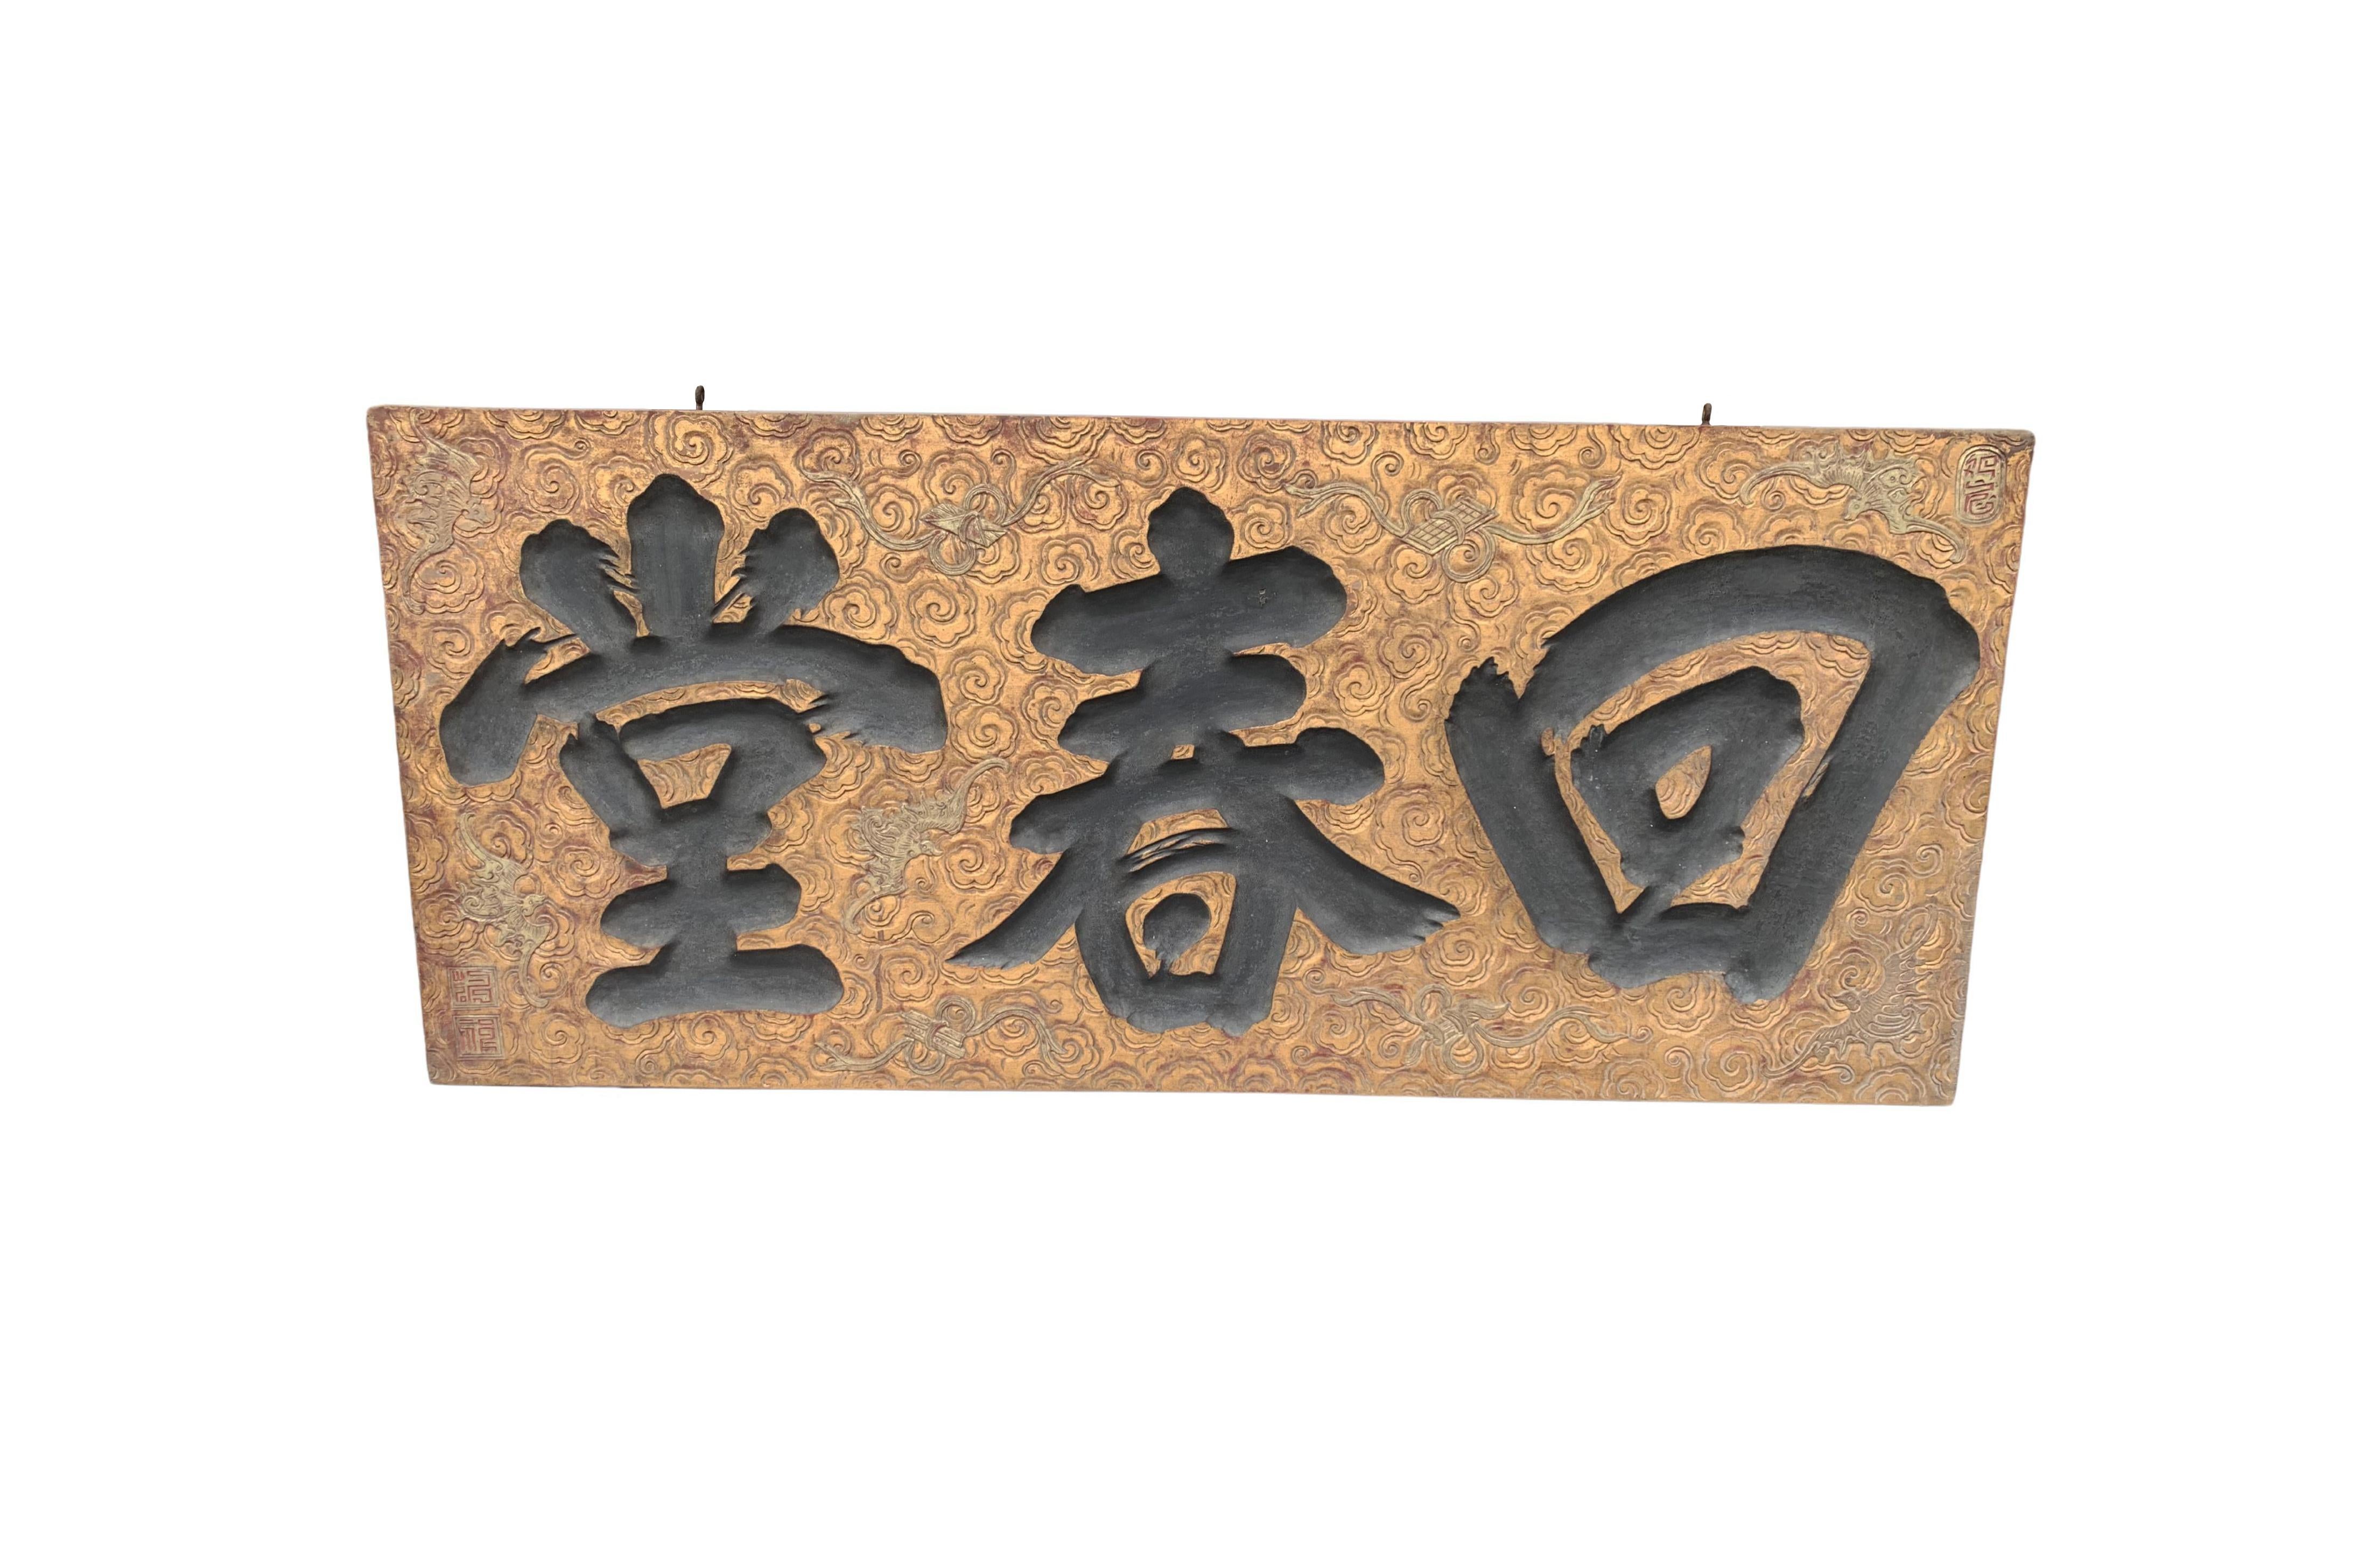 An exquisite Gilded Qing Dynasty Signboard from the early 20th Century. The signboard features a stunning cloud patterning throughout and large black painted Chinese characters. The edges feature a wonderful red paint finish. The age-related patina,